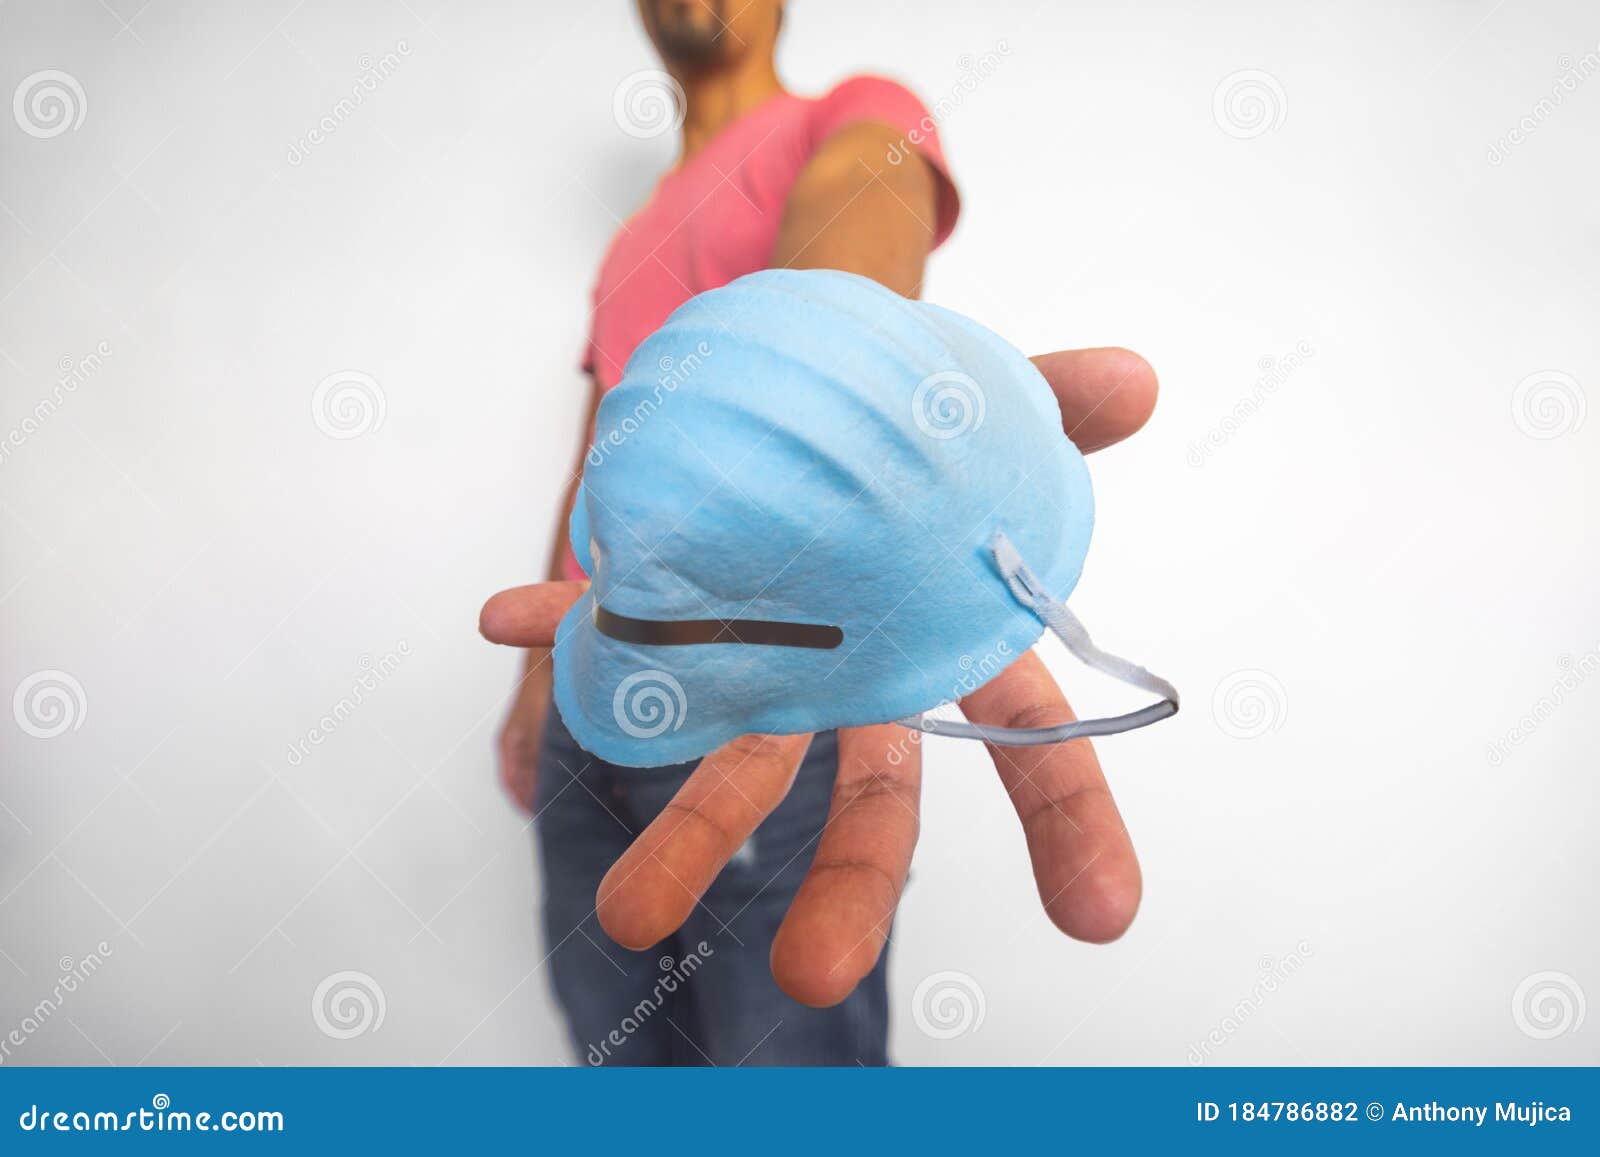 selective focus on the foreground of mask that man delivers to protect you from an infection on white background. social distance